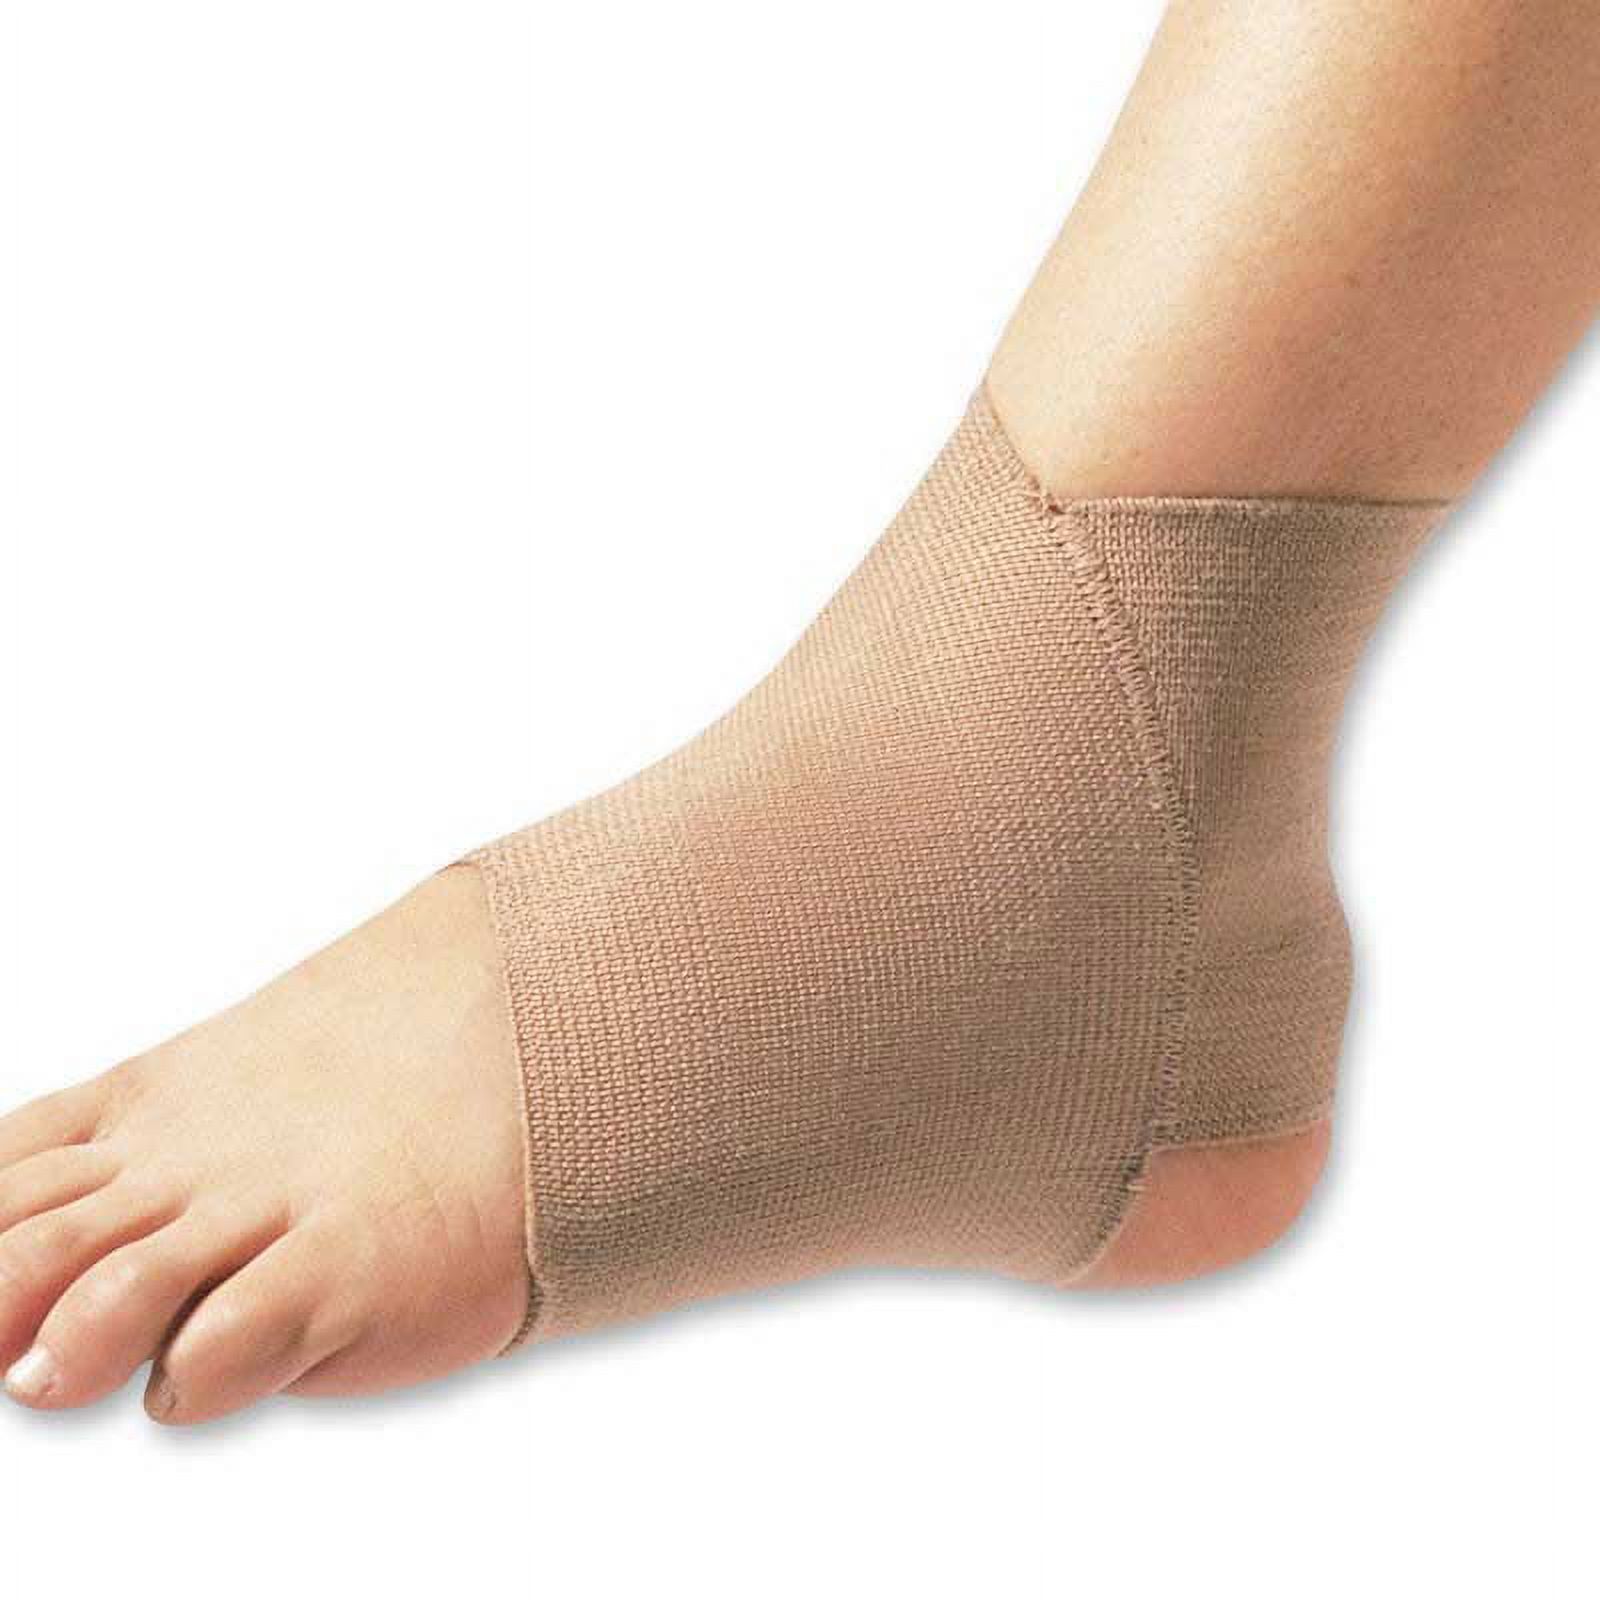 Core Products Elastic Pull-On Ankle Brace Small - image 1 of 2